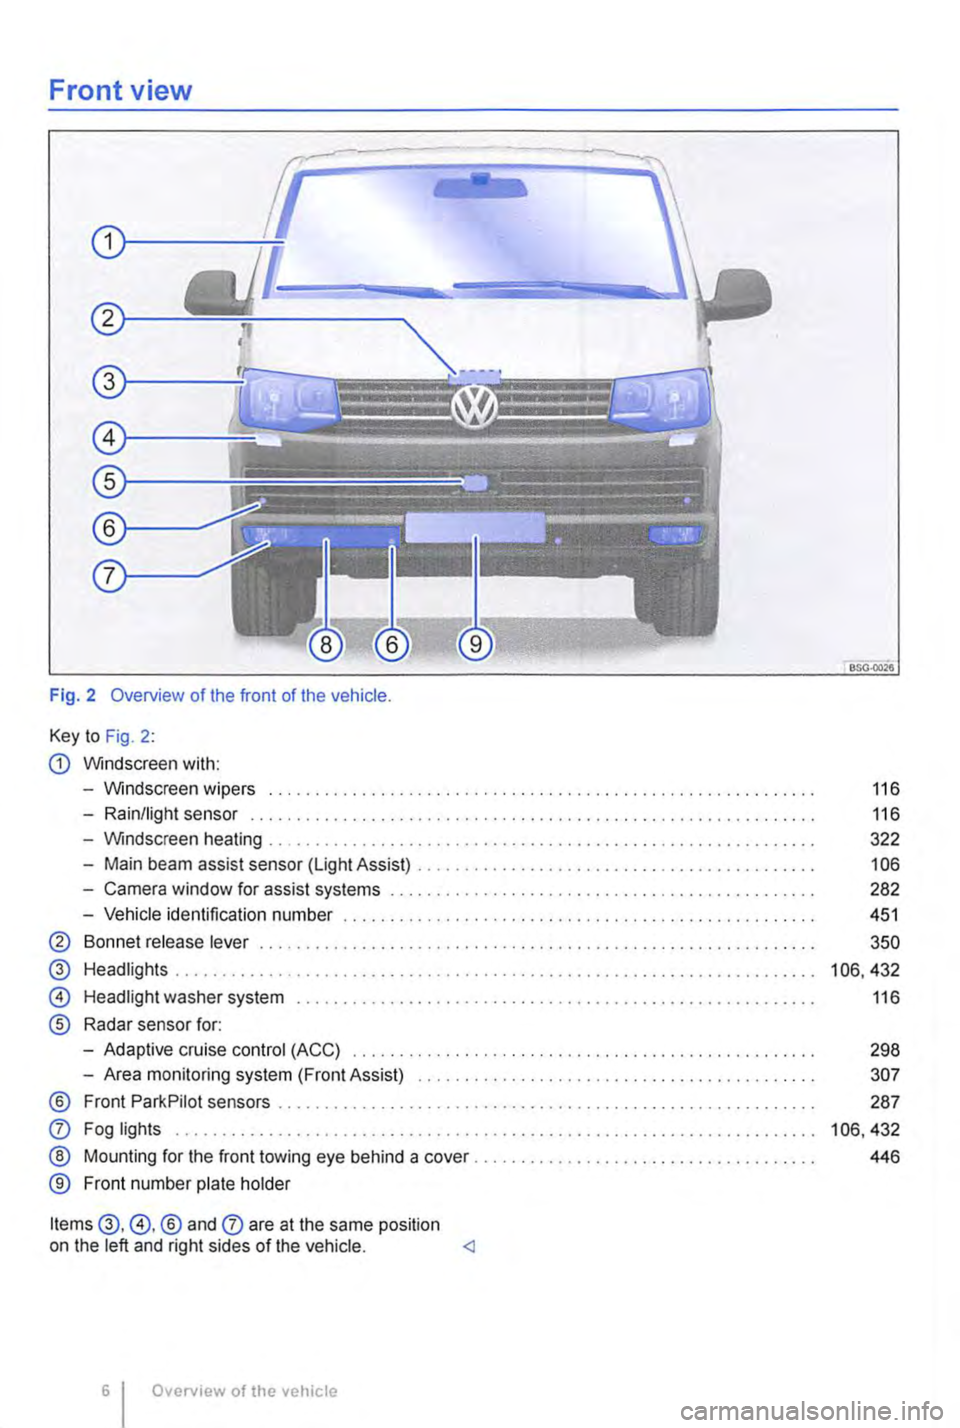 VOLKSWAGEN TRANSPORTER 2012  Owners Manual Front view 
Fig. 2 Overview of the front of the vehicle. 
Key to Fig. 2: 
G) Windscreen with: 
-Windscreen wipers .............. . 
-Rain/light sensor .............. . 
-Windscreen heating 
-Main beam